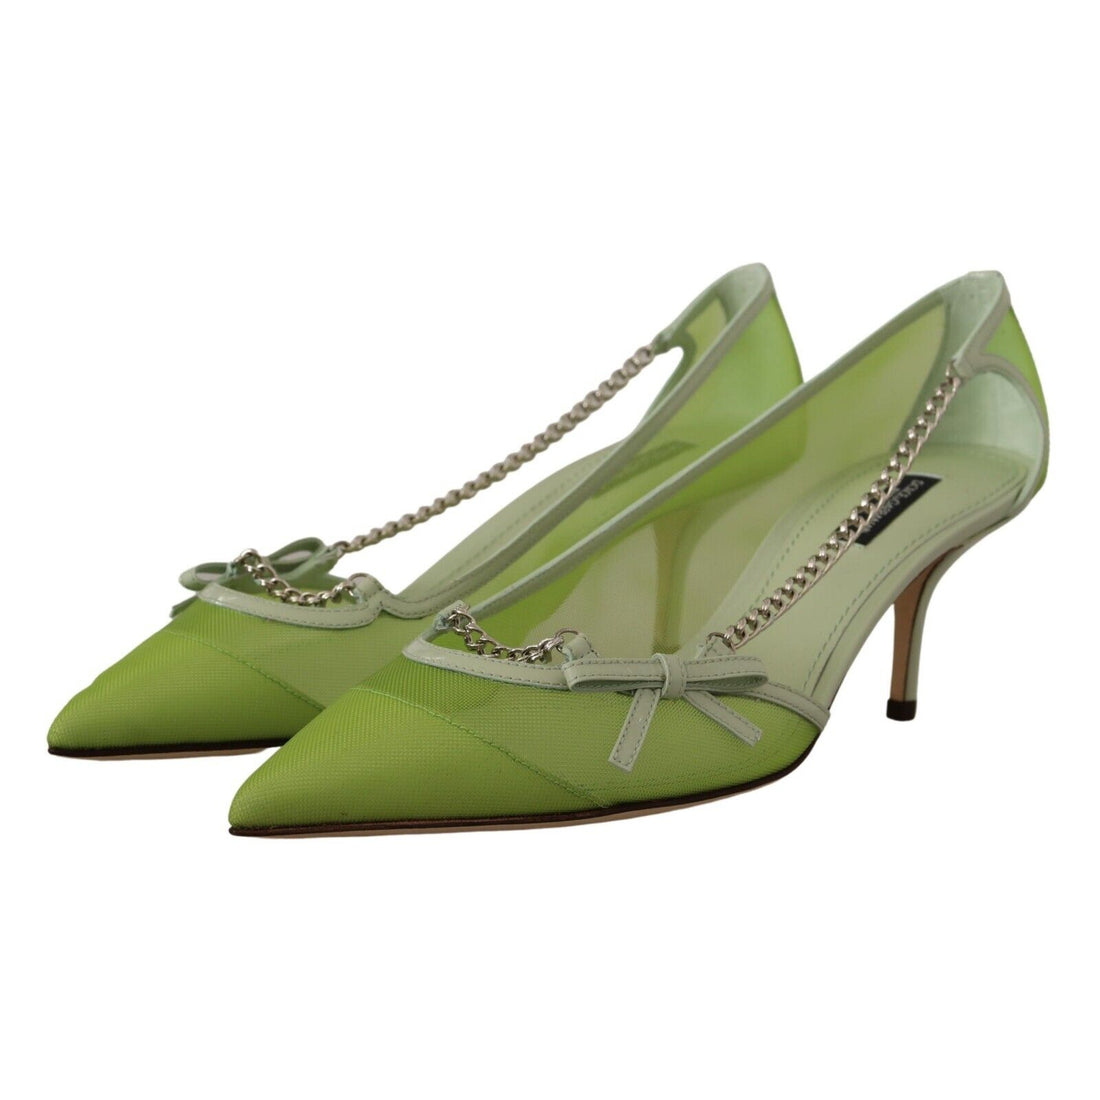 Dolce & Gabbana Green Mesh Leather Chains Heels Pumps Shoes